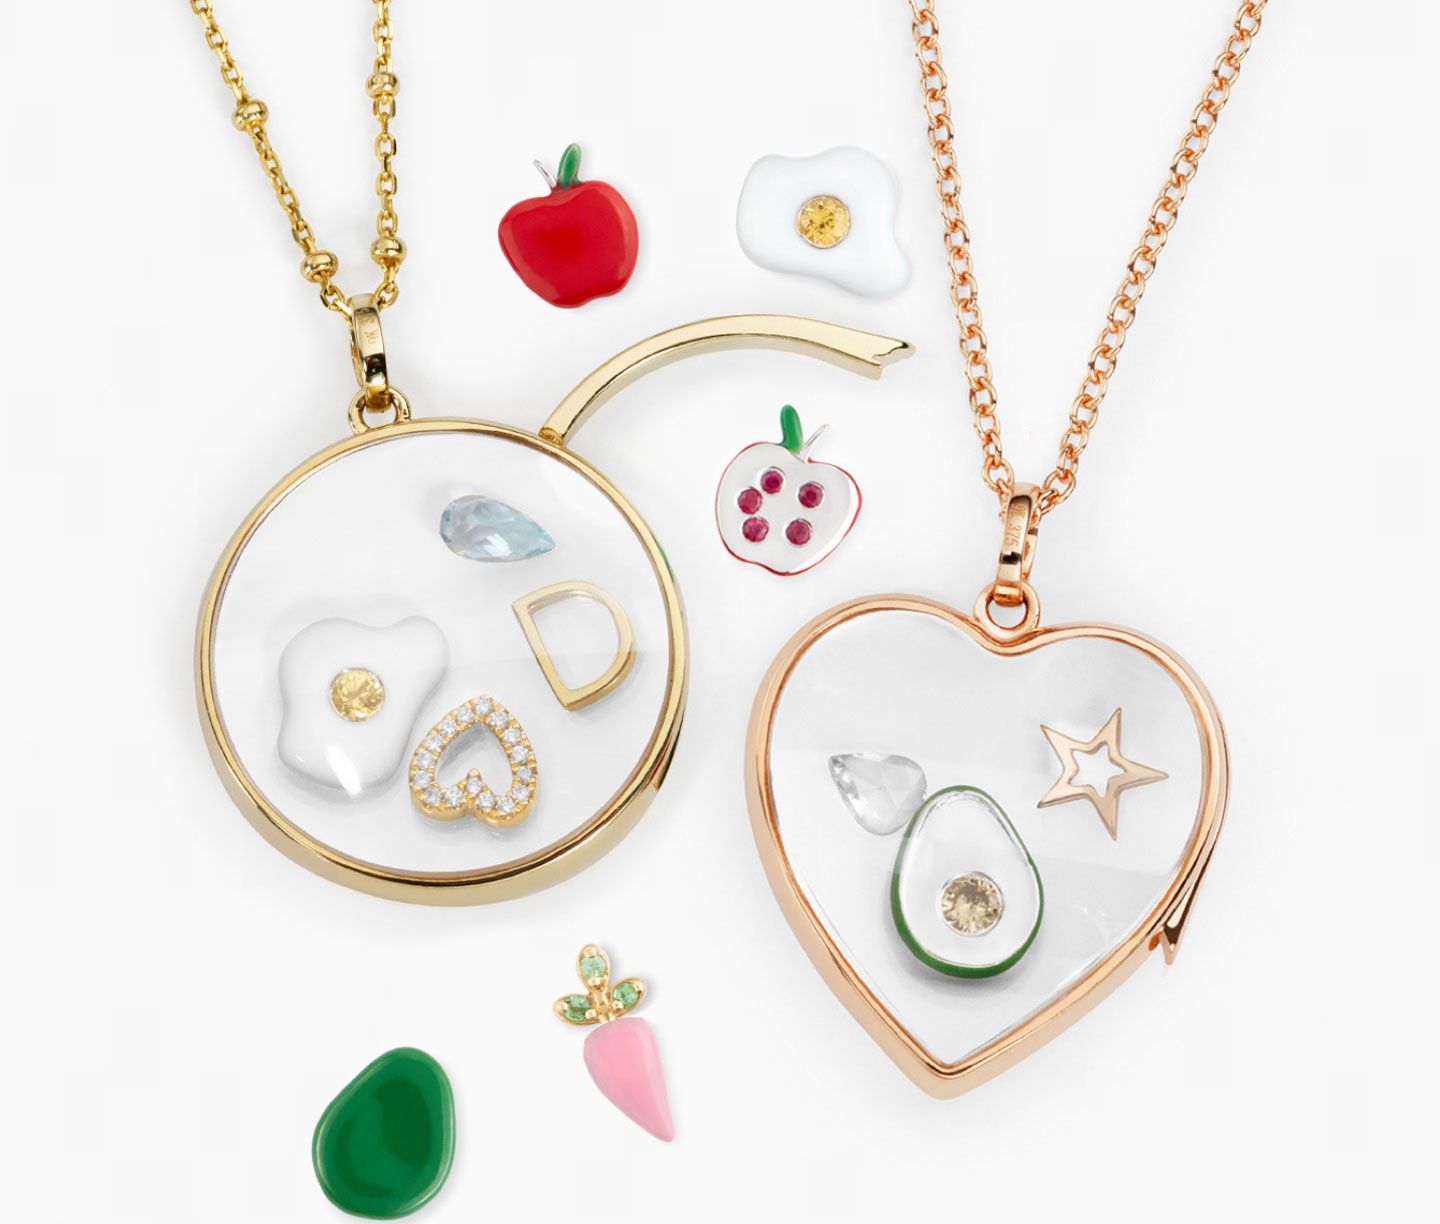 16 reasons why we’re newly obsessed with lockets